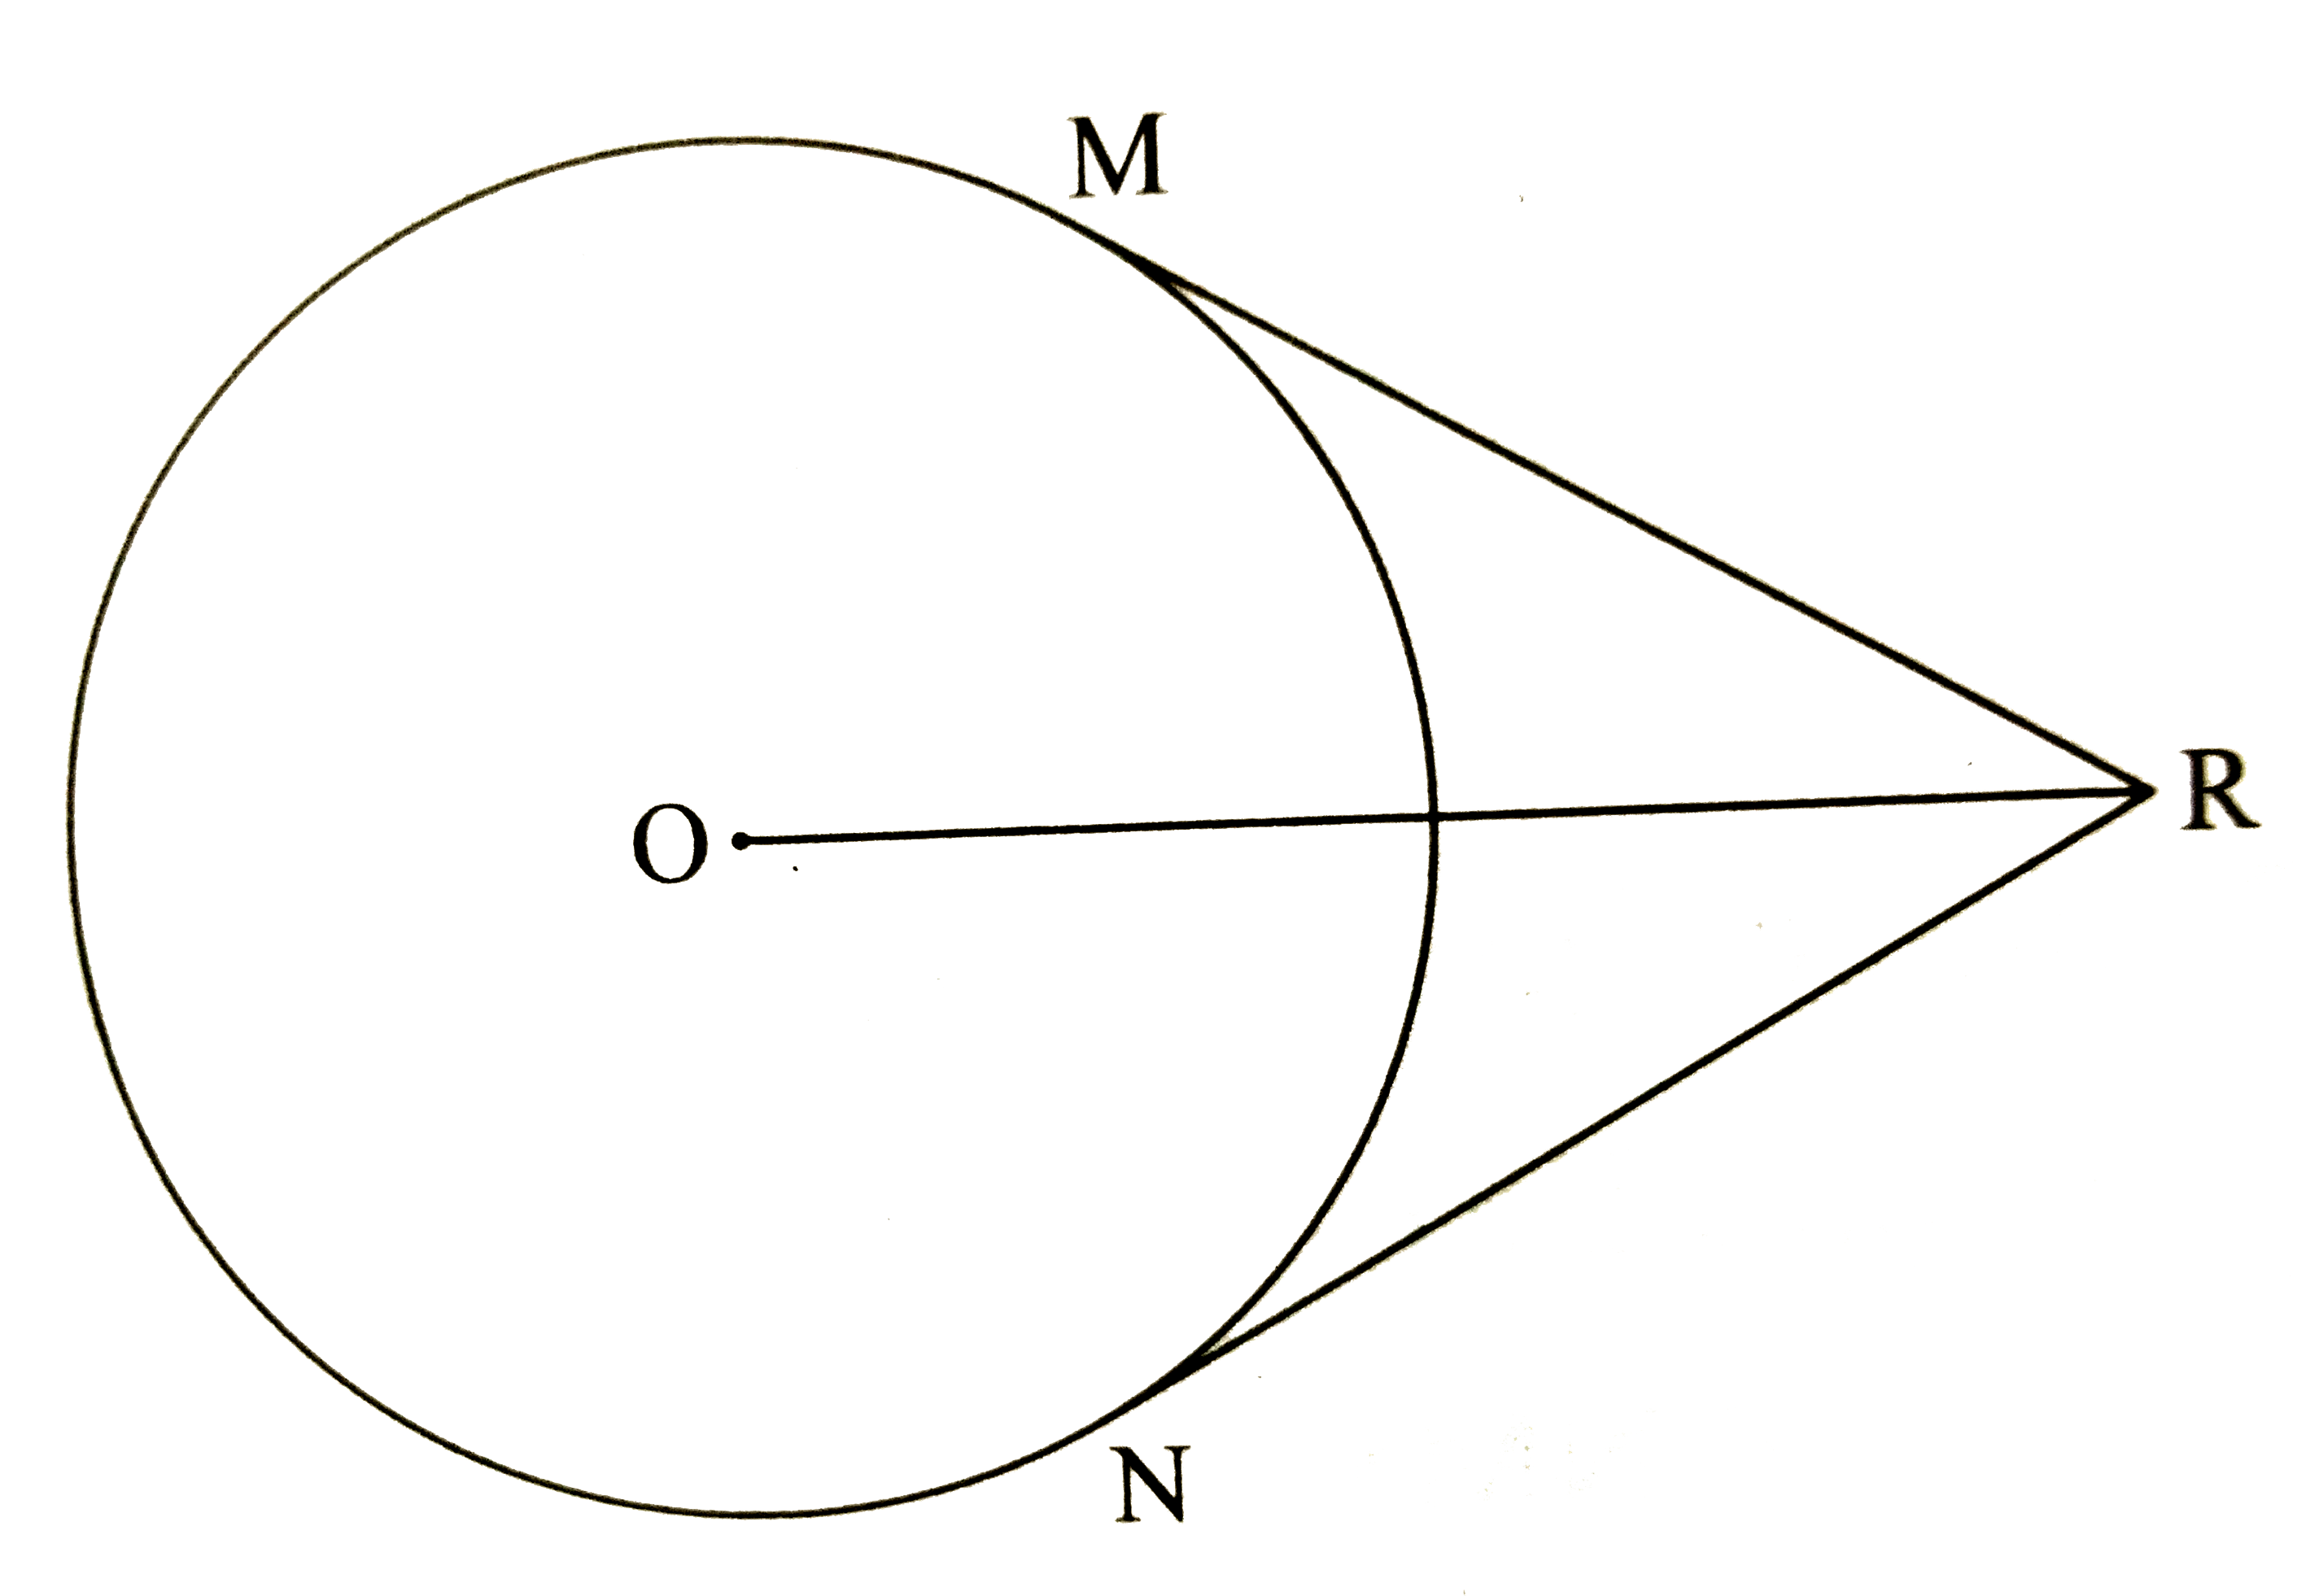 In the figure , O is the center of the circle. From point R, seg RM and   seg RN are tangent segments touching the circle at M and N.   If OR = 10cm  and radius of the circle = 5 cm, then   (i) What is the length of each tanget segment ?   (iii) What is the measure of /MRO  ?   (iii) Whatis the measure of / MRN   ?